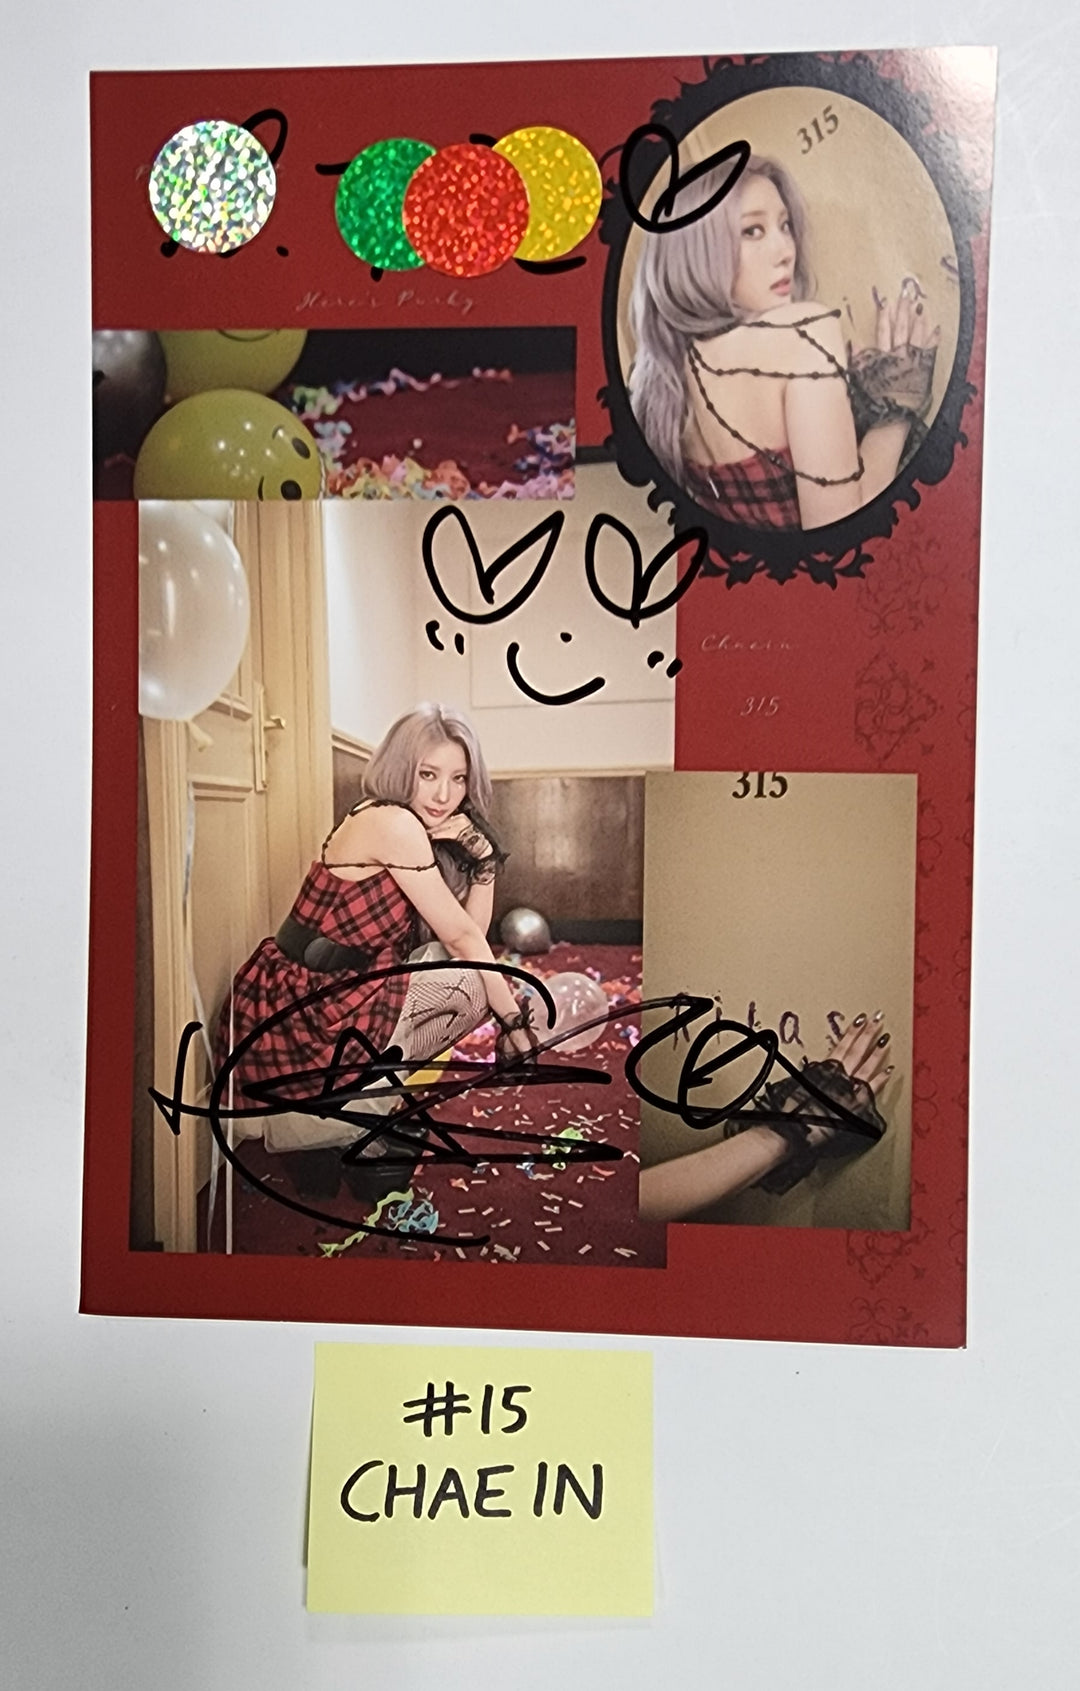 PURPLE KISS "Cabin Fever" - A Cut Page From Fansign Event Album